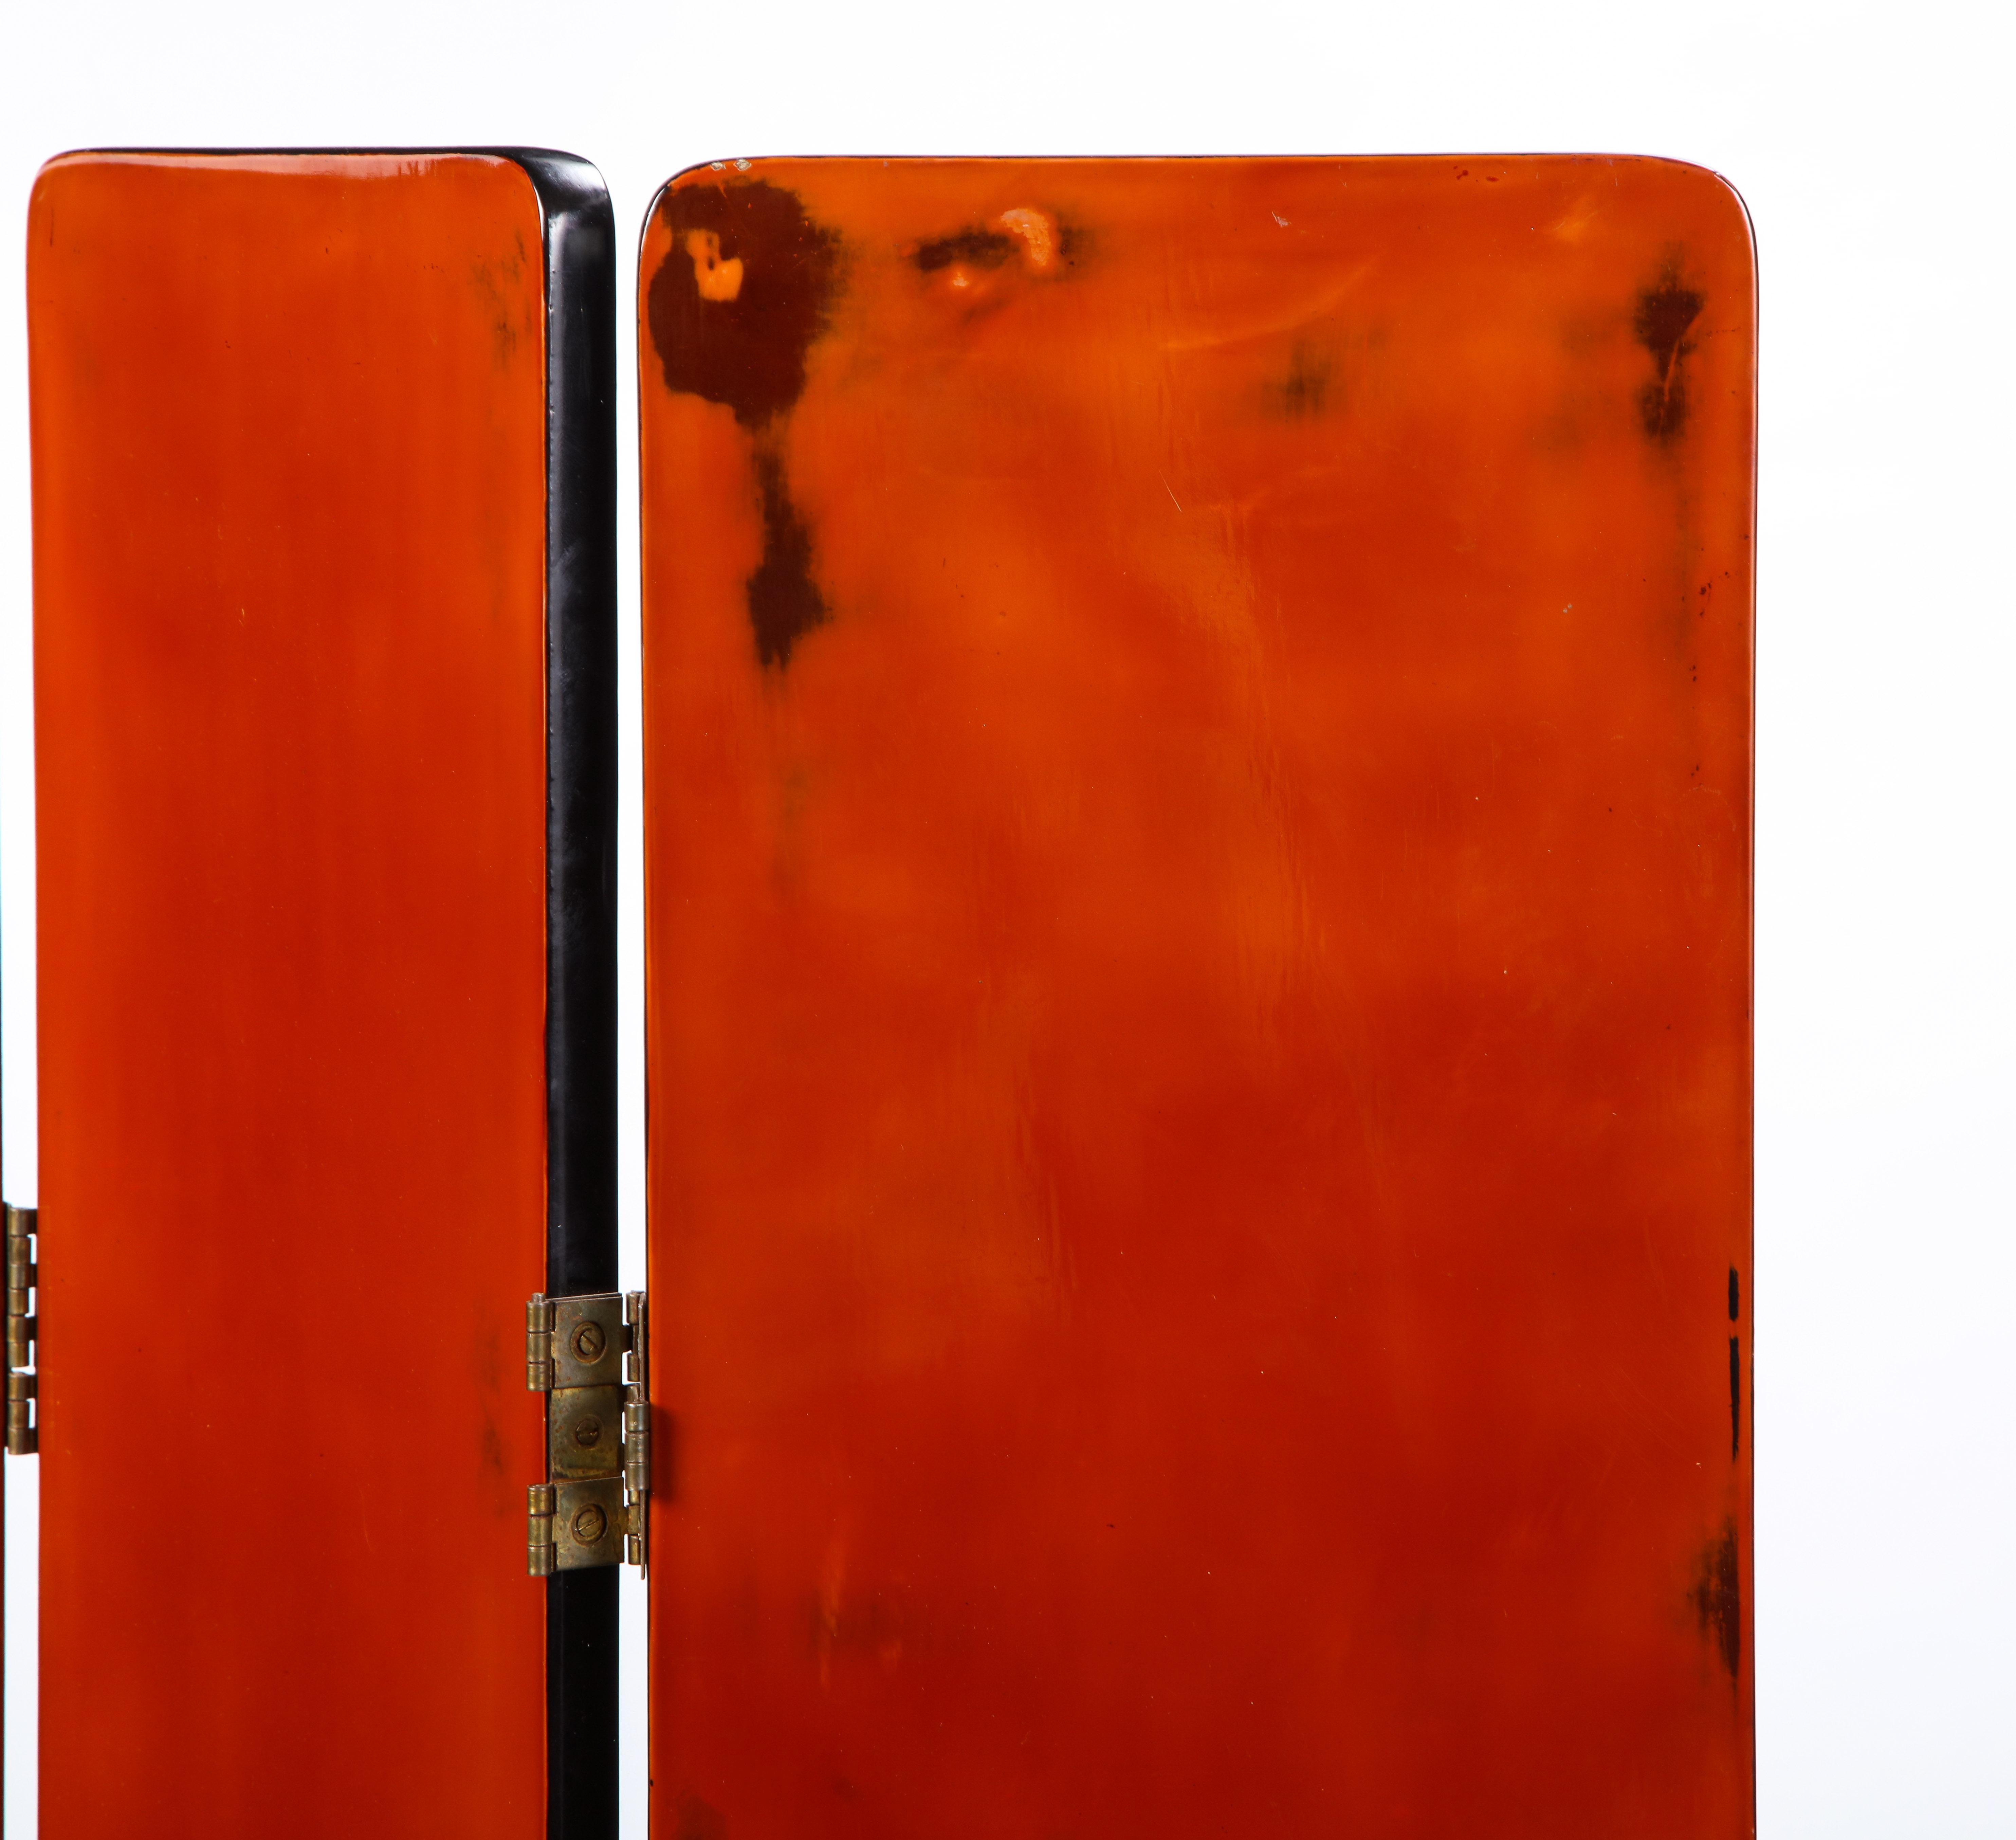 Six-Panel Lacquer Screen in Orange and Black, Modern 3